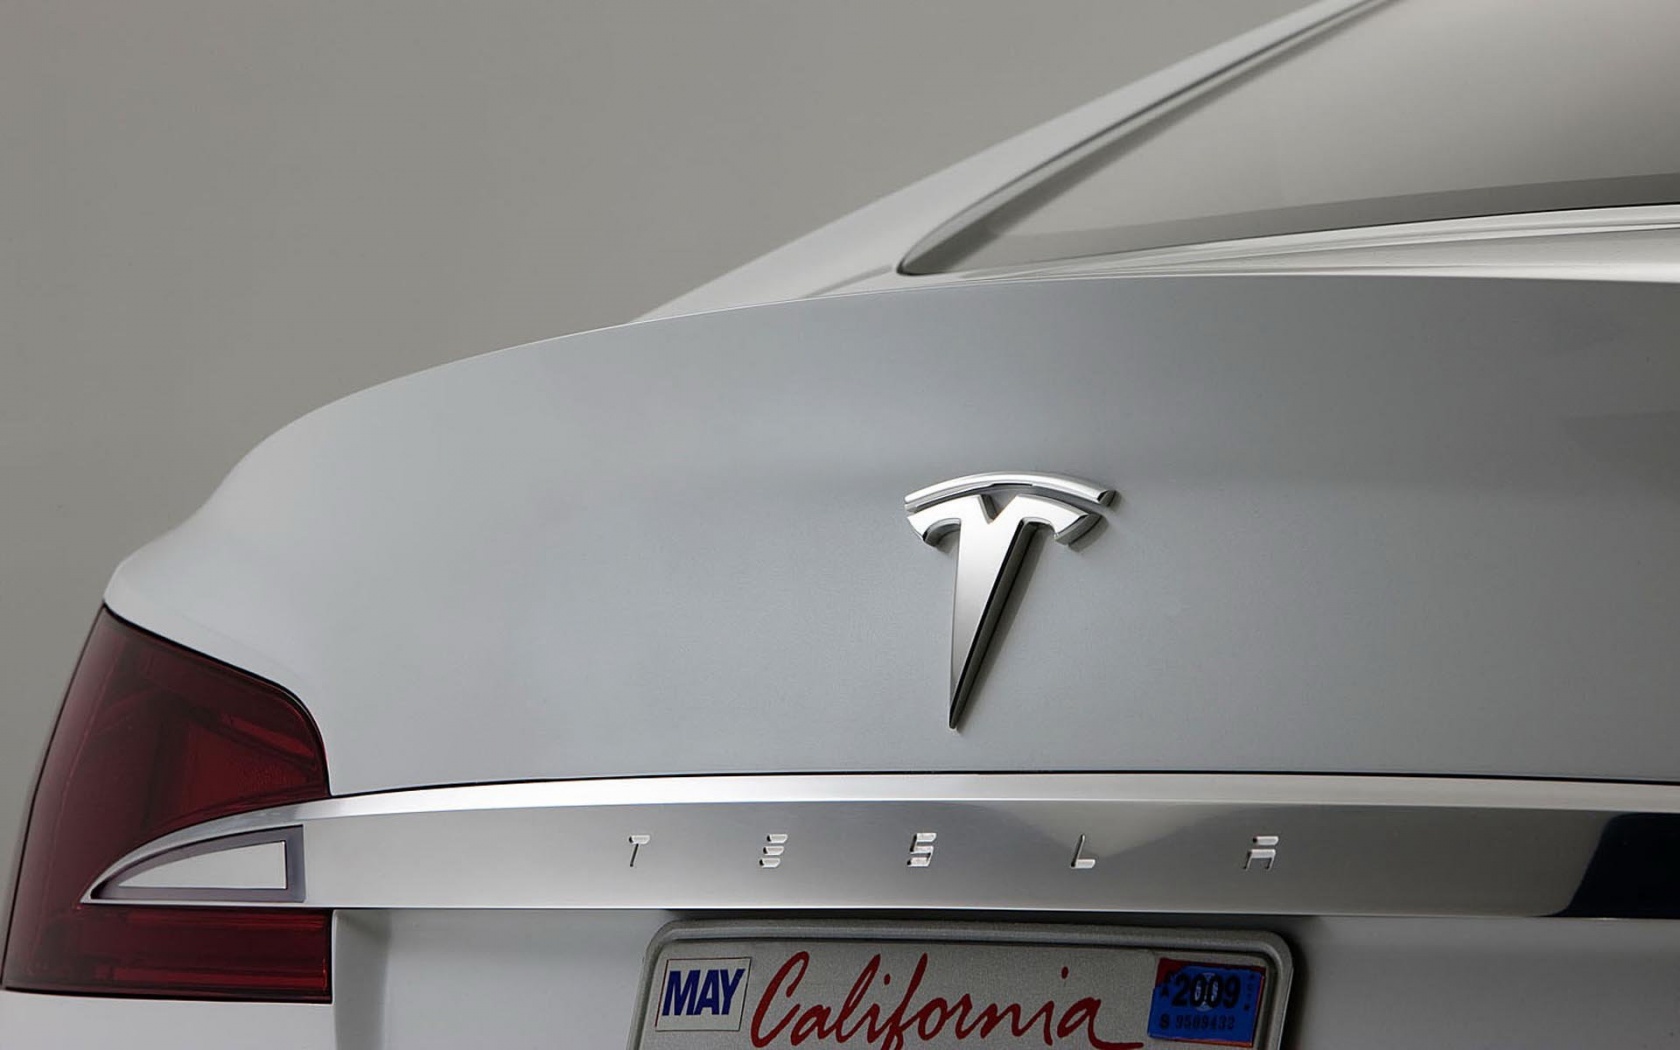 Report: Tesla Set to Introduce Compact Crossover Under $30,000 by 2025 